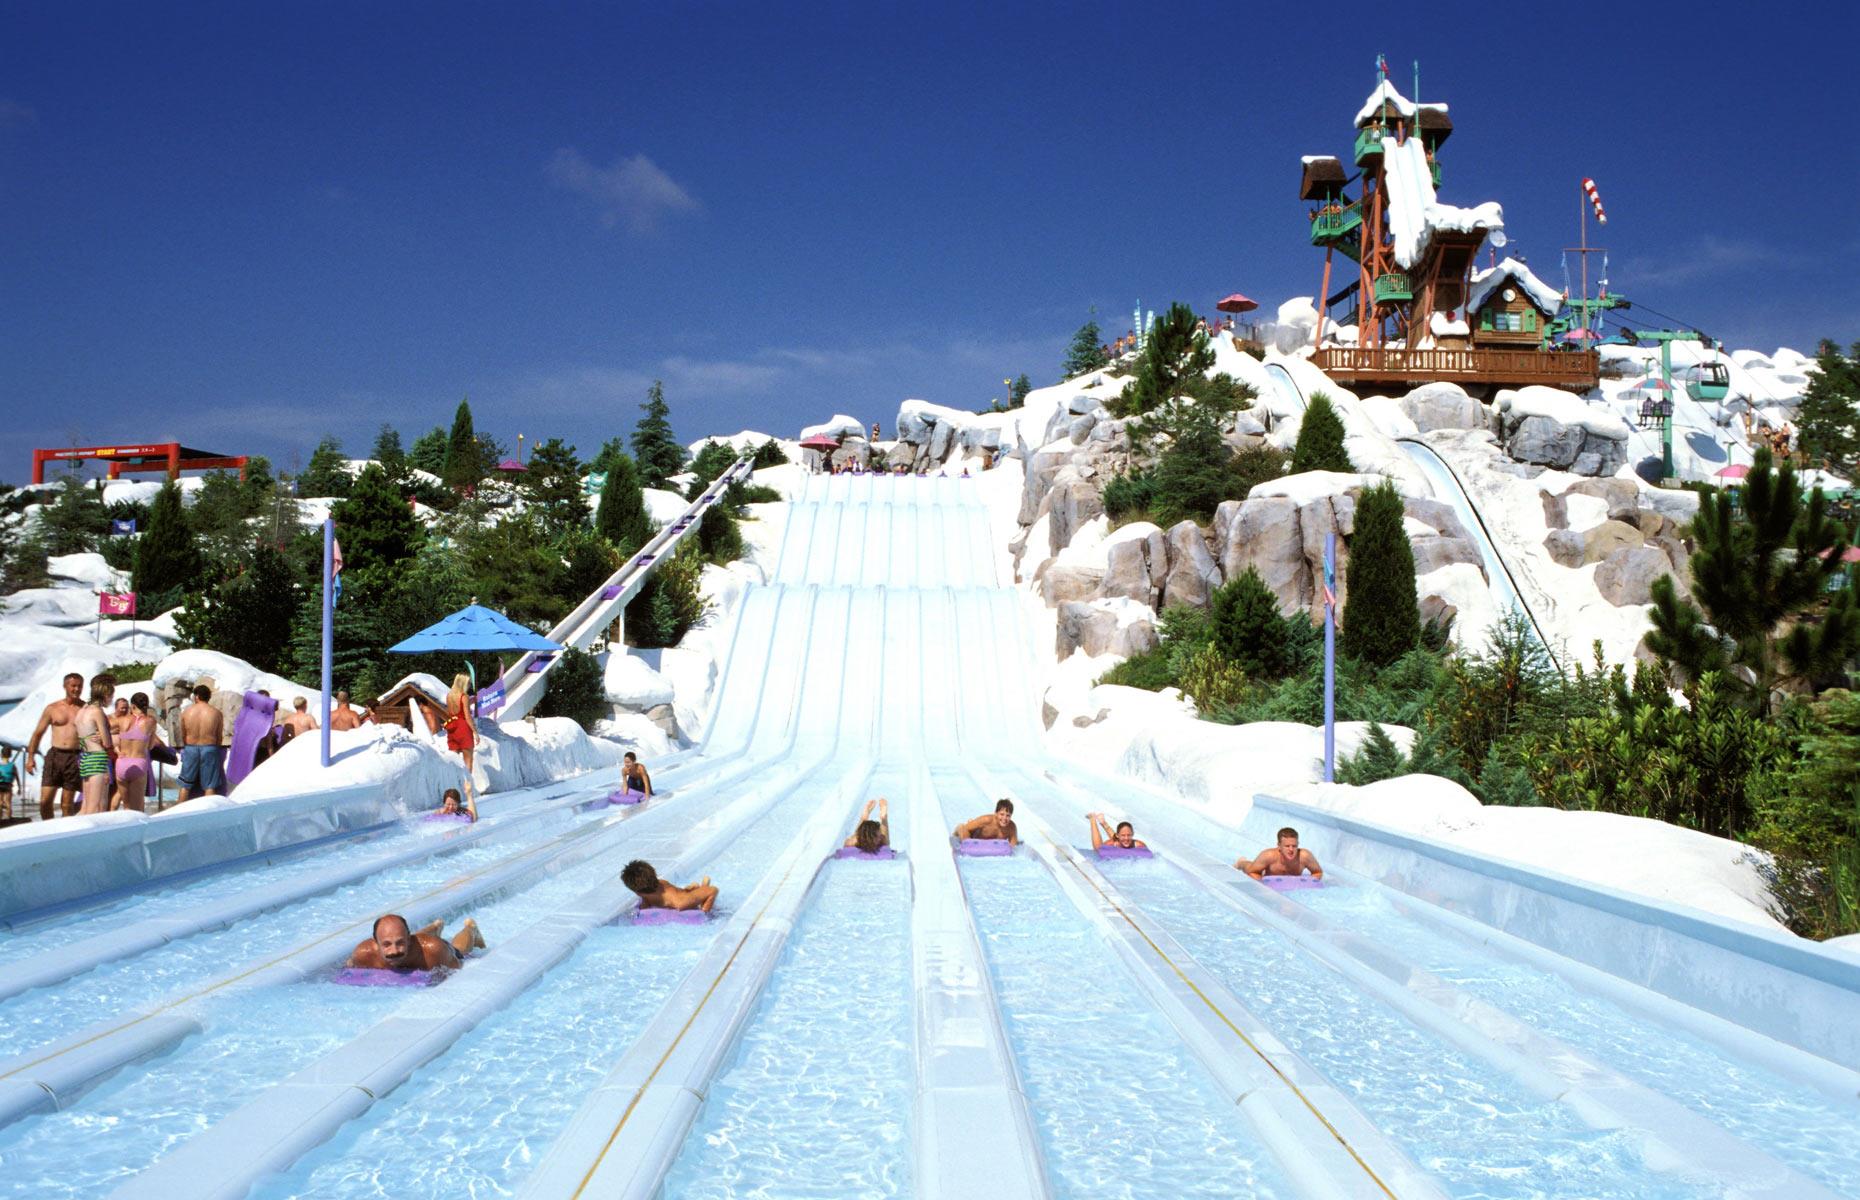 <p>Another Floridian offering and one of the USA's most popular waterparks, Blizzard Beach – Typhoon Lagoon’s sister attraction at Walt Disney World – mixes its frozen landscape with huge slides, a lazy river and a white-water rafting experience for large groups. Summit Plummet is one of the tallest and fastest freefall body slides, but more sedate offerings include a polar-themed wonderland for younger children and a wading pool complete with Disney Frozen character statues.</p>